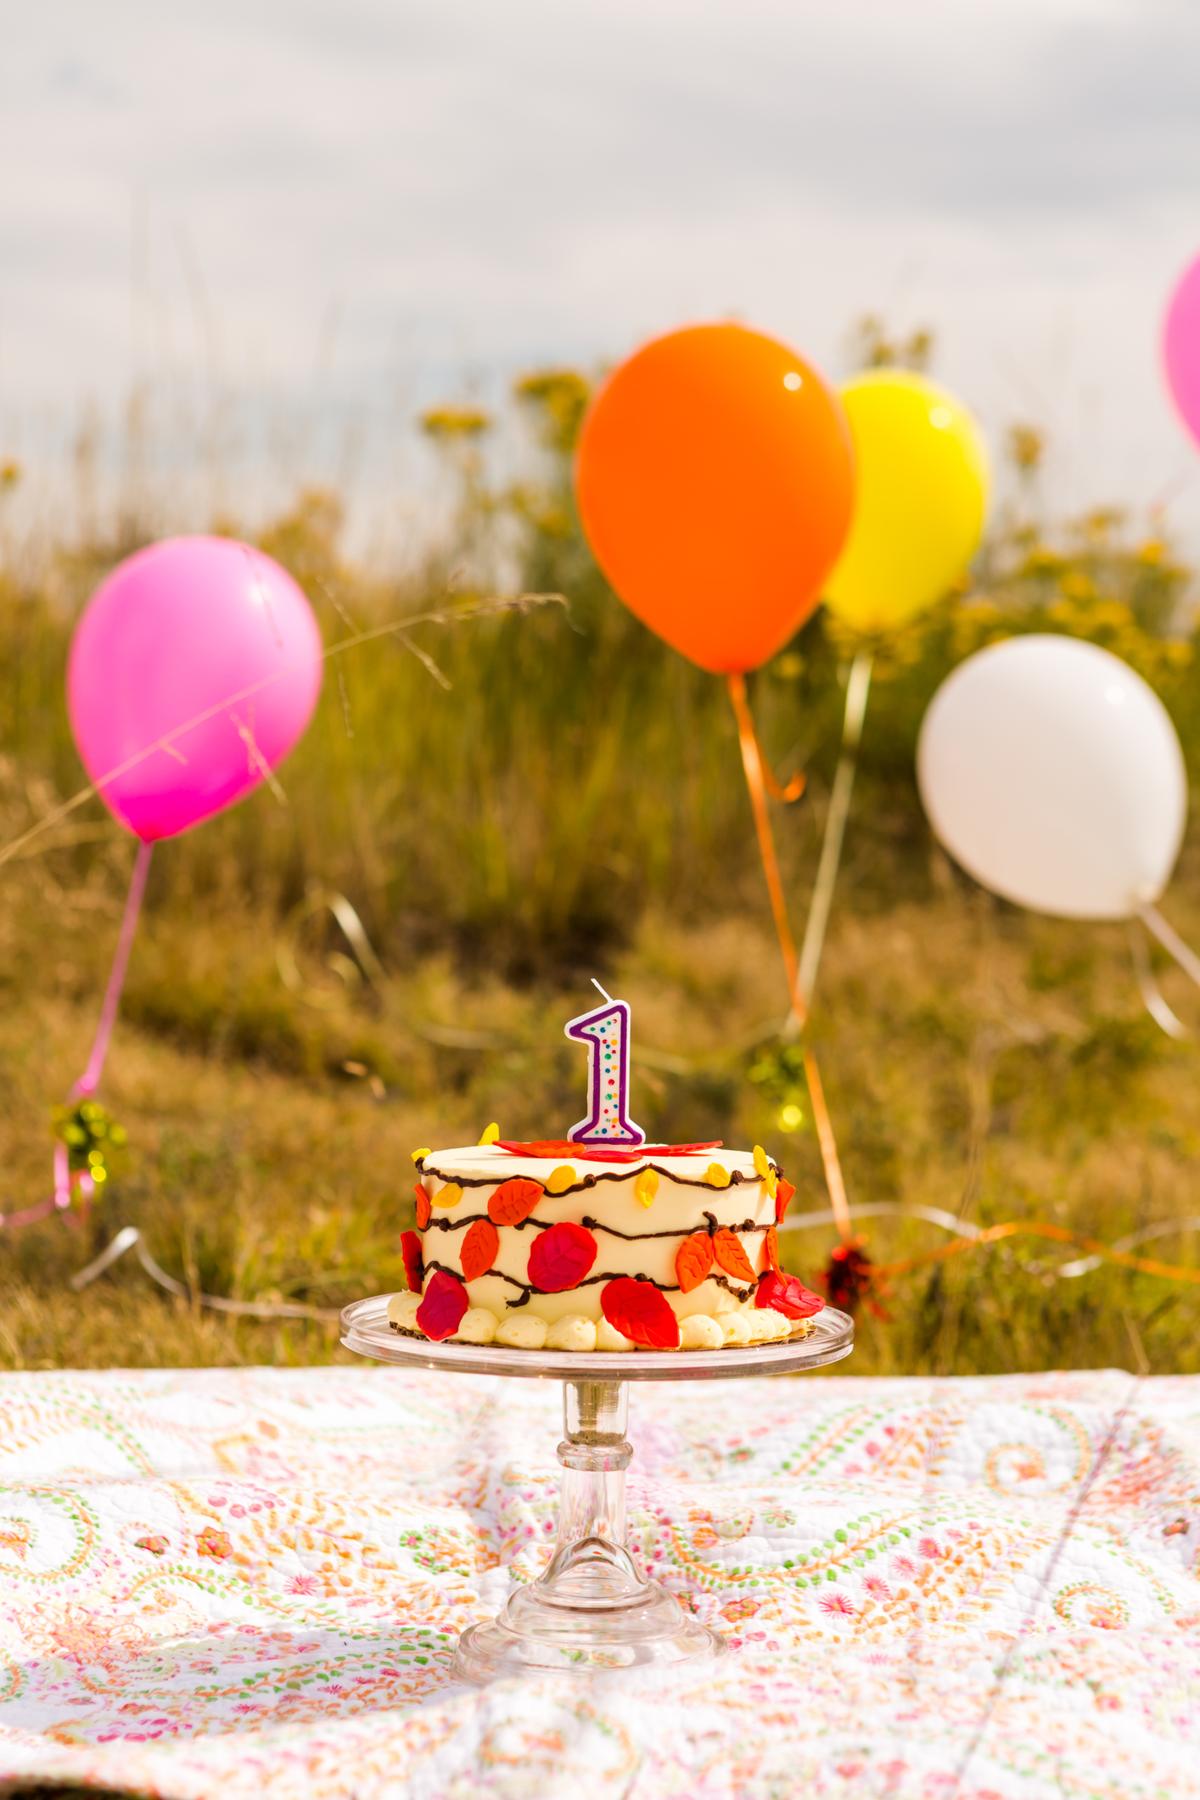 fret not! here's a list of great last minute birthday party ideas